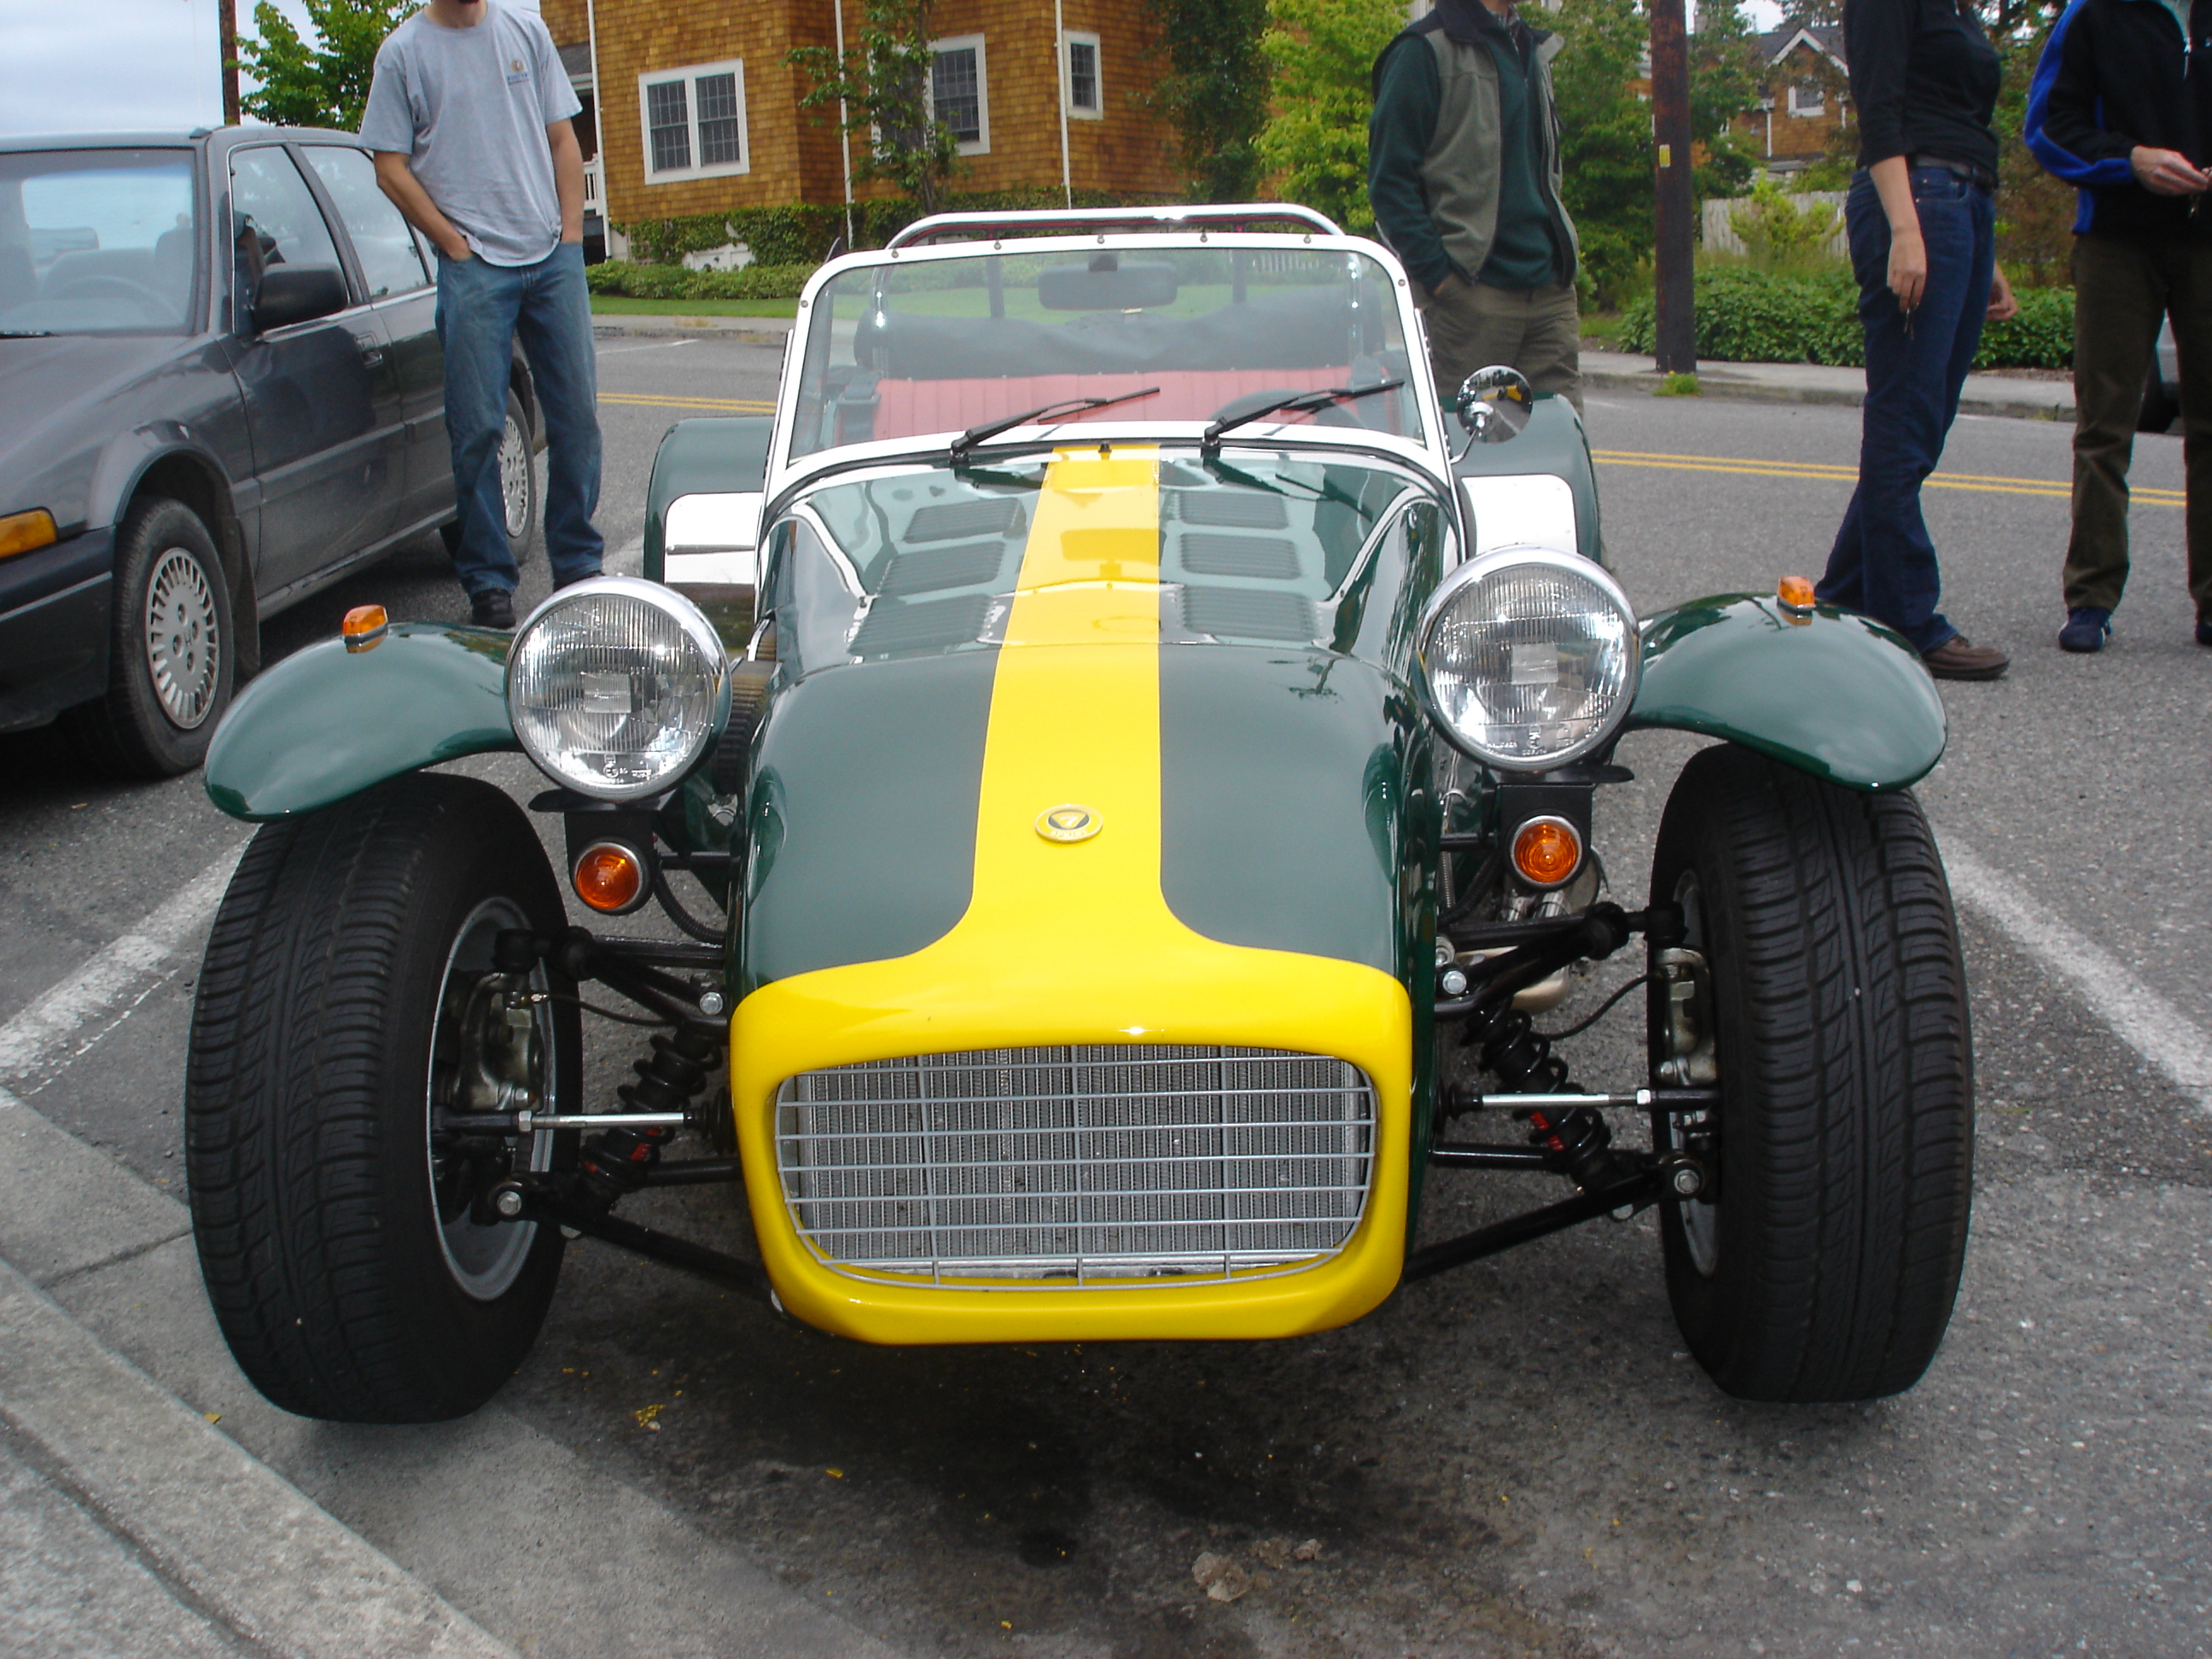 Surrey-based Caterham Cars move to new home in Sussex - Worldnews.